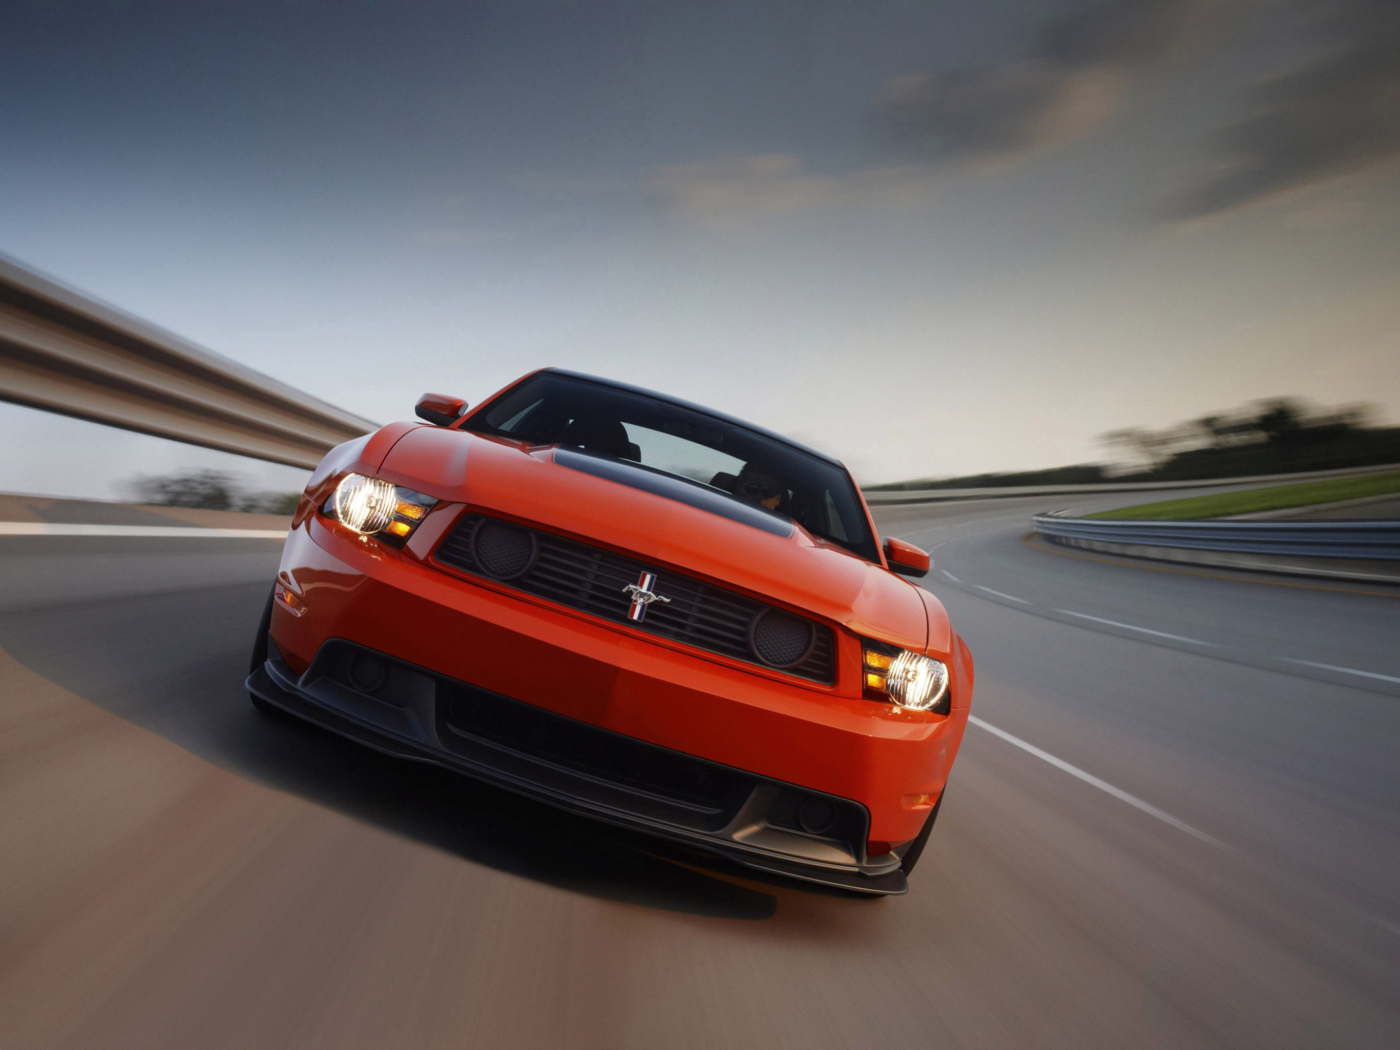 Red Cars Ford Mustang wallpaper 1400x1050